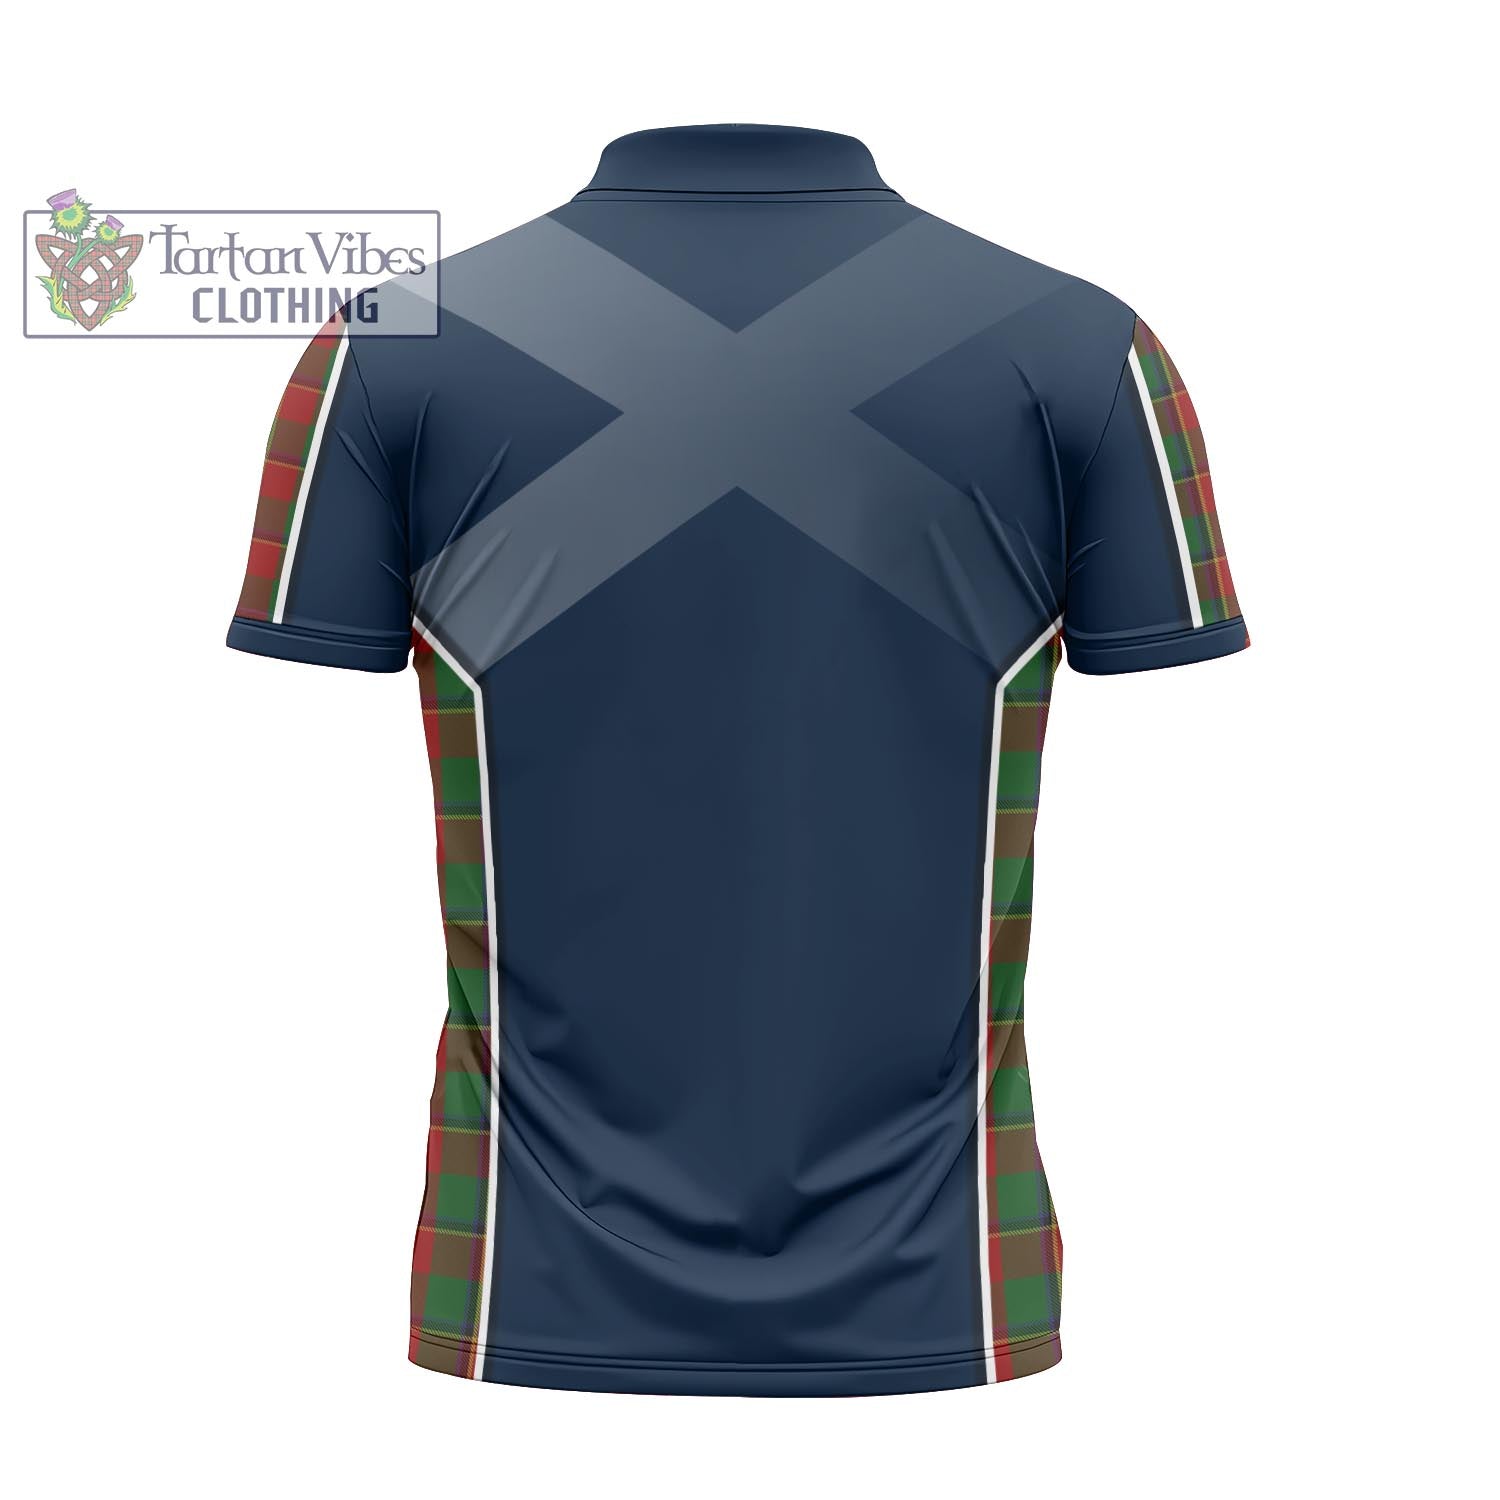 Tartan Vibes Clothing Turnbull Dress Tartan Zipper Polo Shirt with Family Crest and Lion Rampant Vibes Sport Style